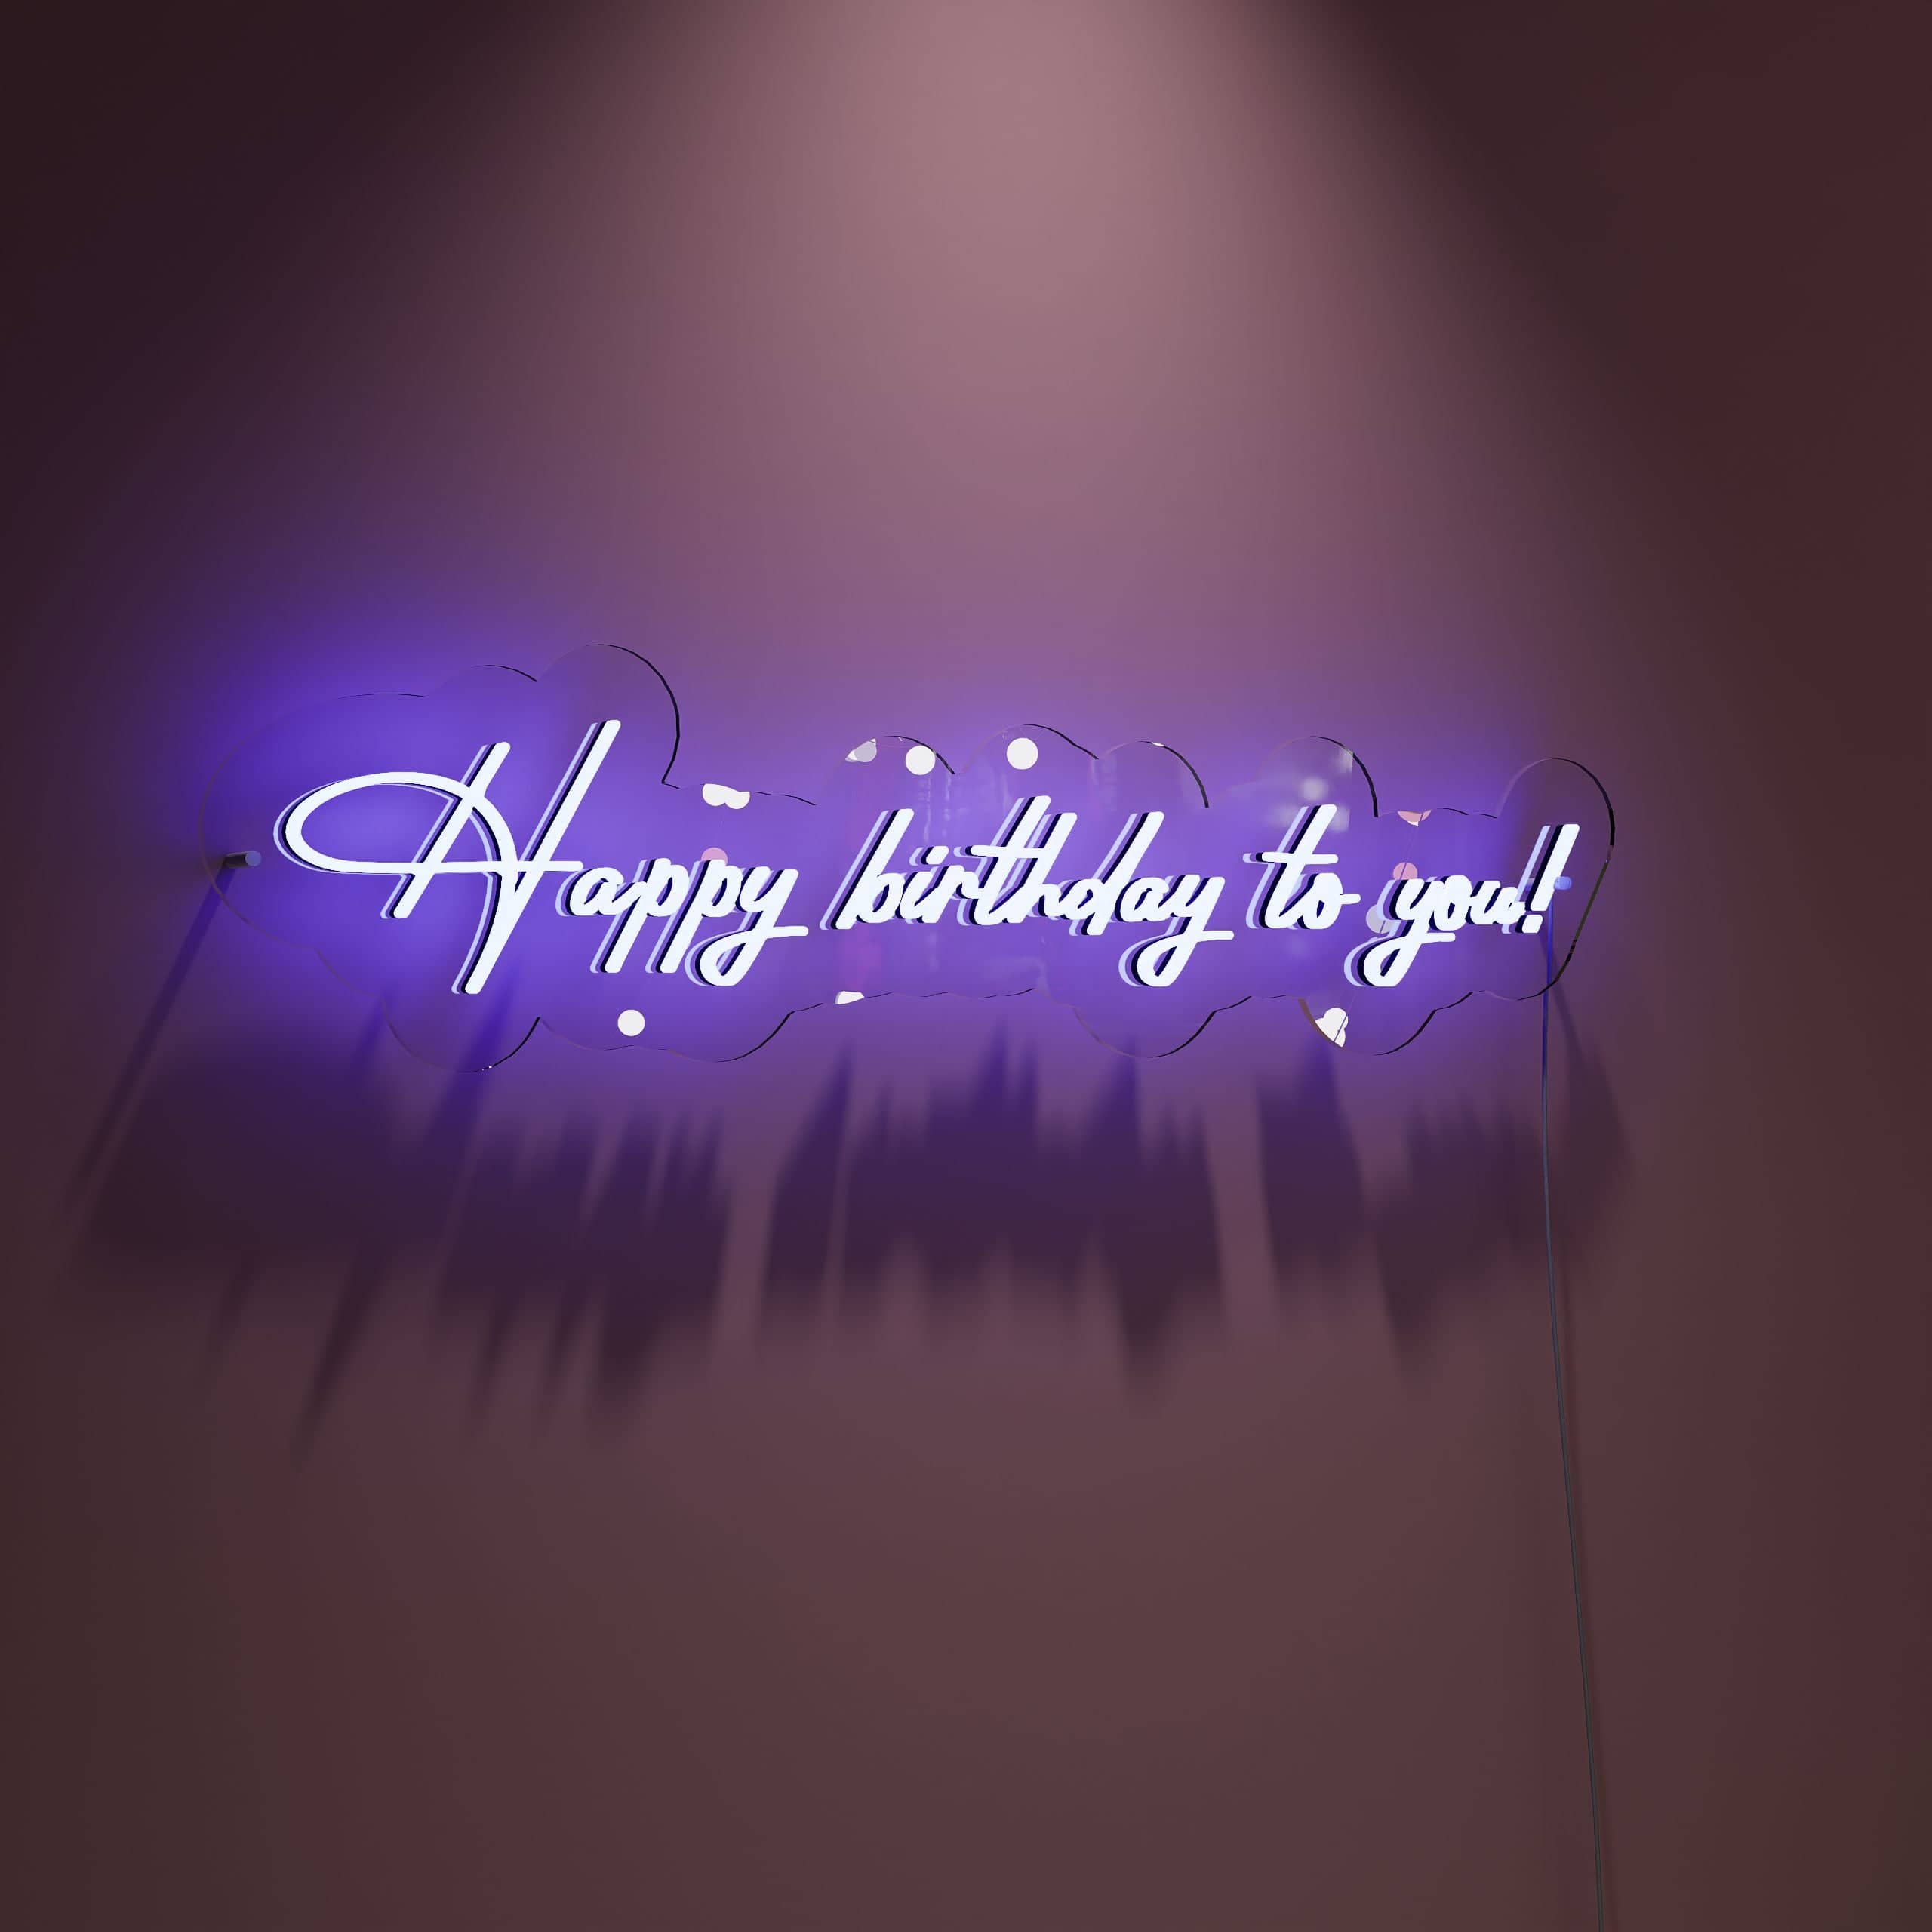 wishing-you-a-very-happy-birthday!-neon-sign-lite